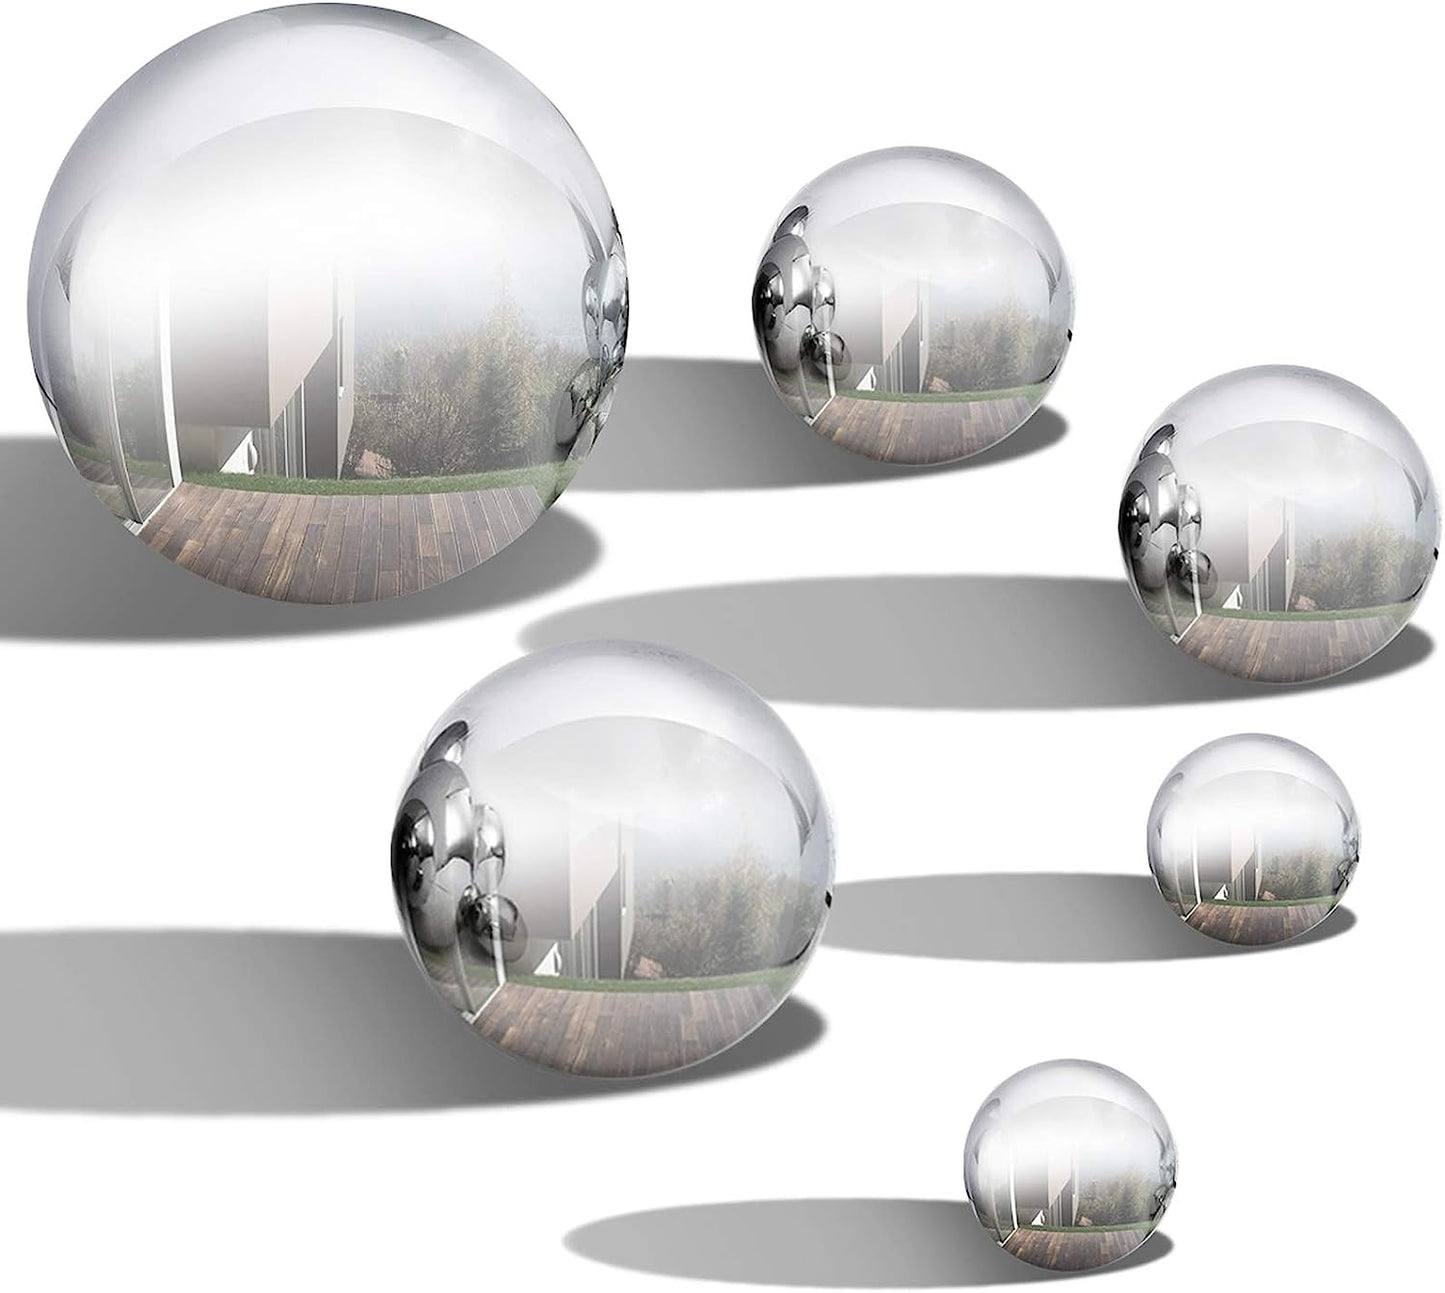 6 Pcs Garden Gazing Ball - 50-150Mm Stainless Steel Mirror Polished Reflective Hollow Ball Ornament Sphere Globe for Home Outdoor Christmas Decorations (Set of 6 Pcs)